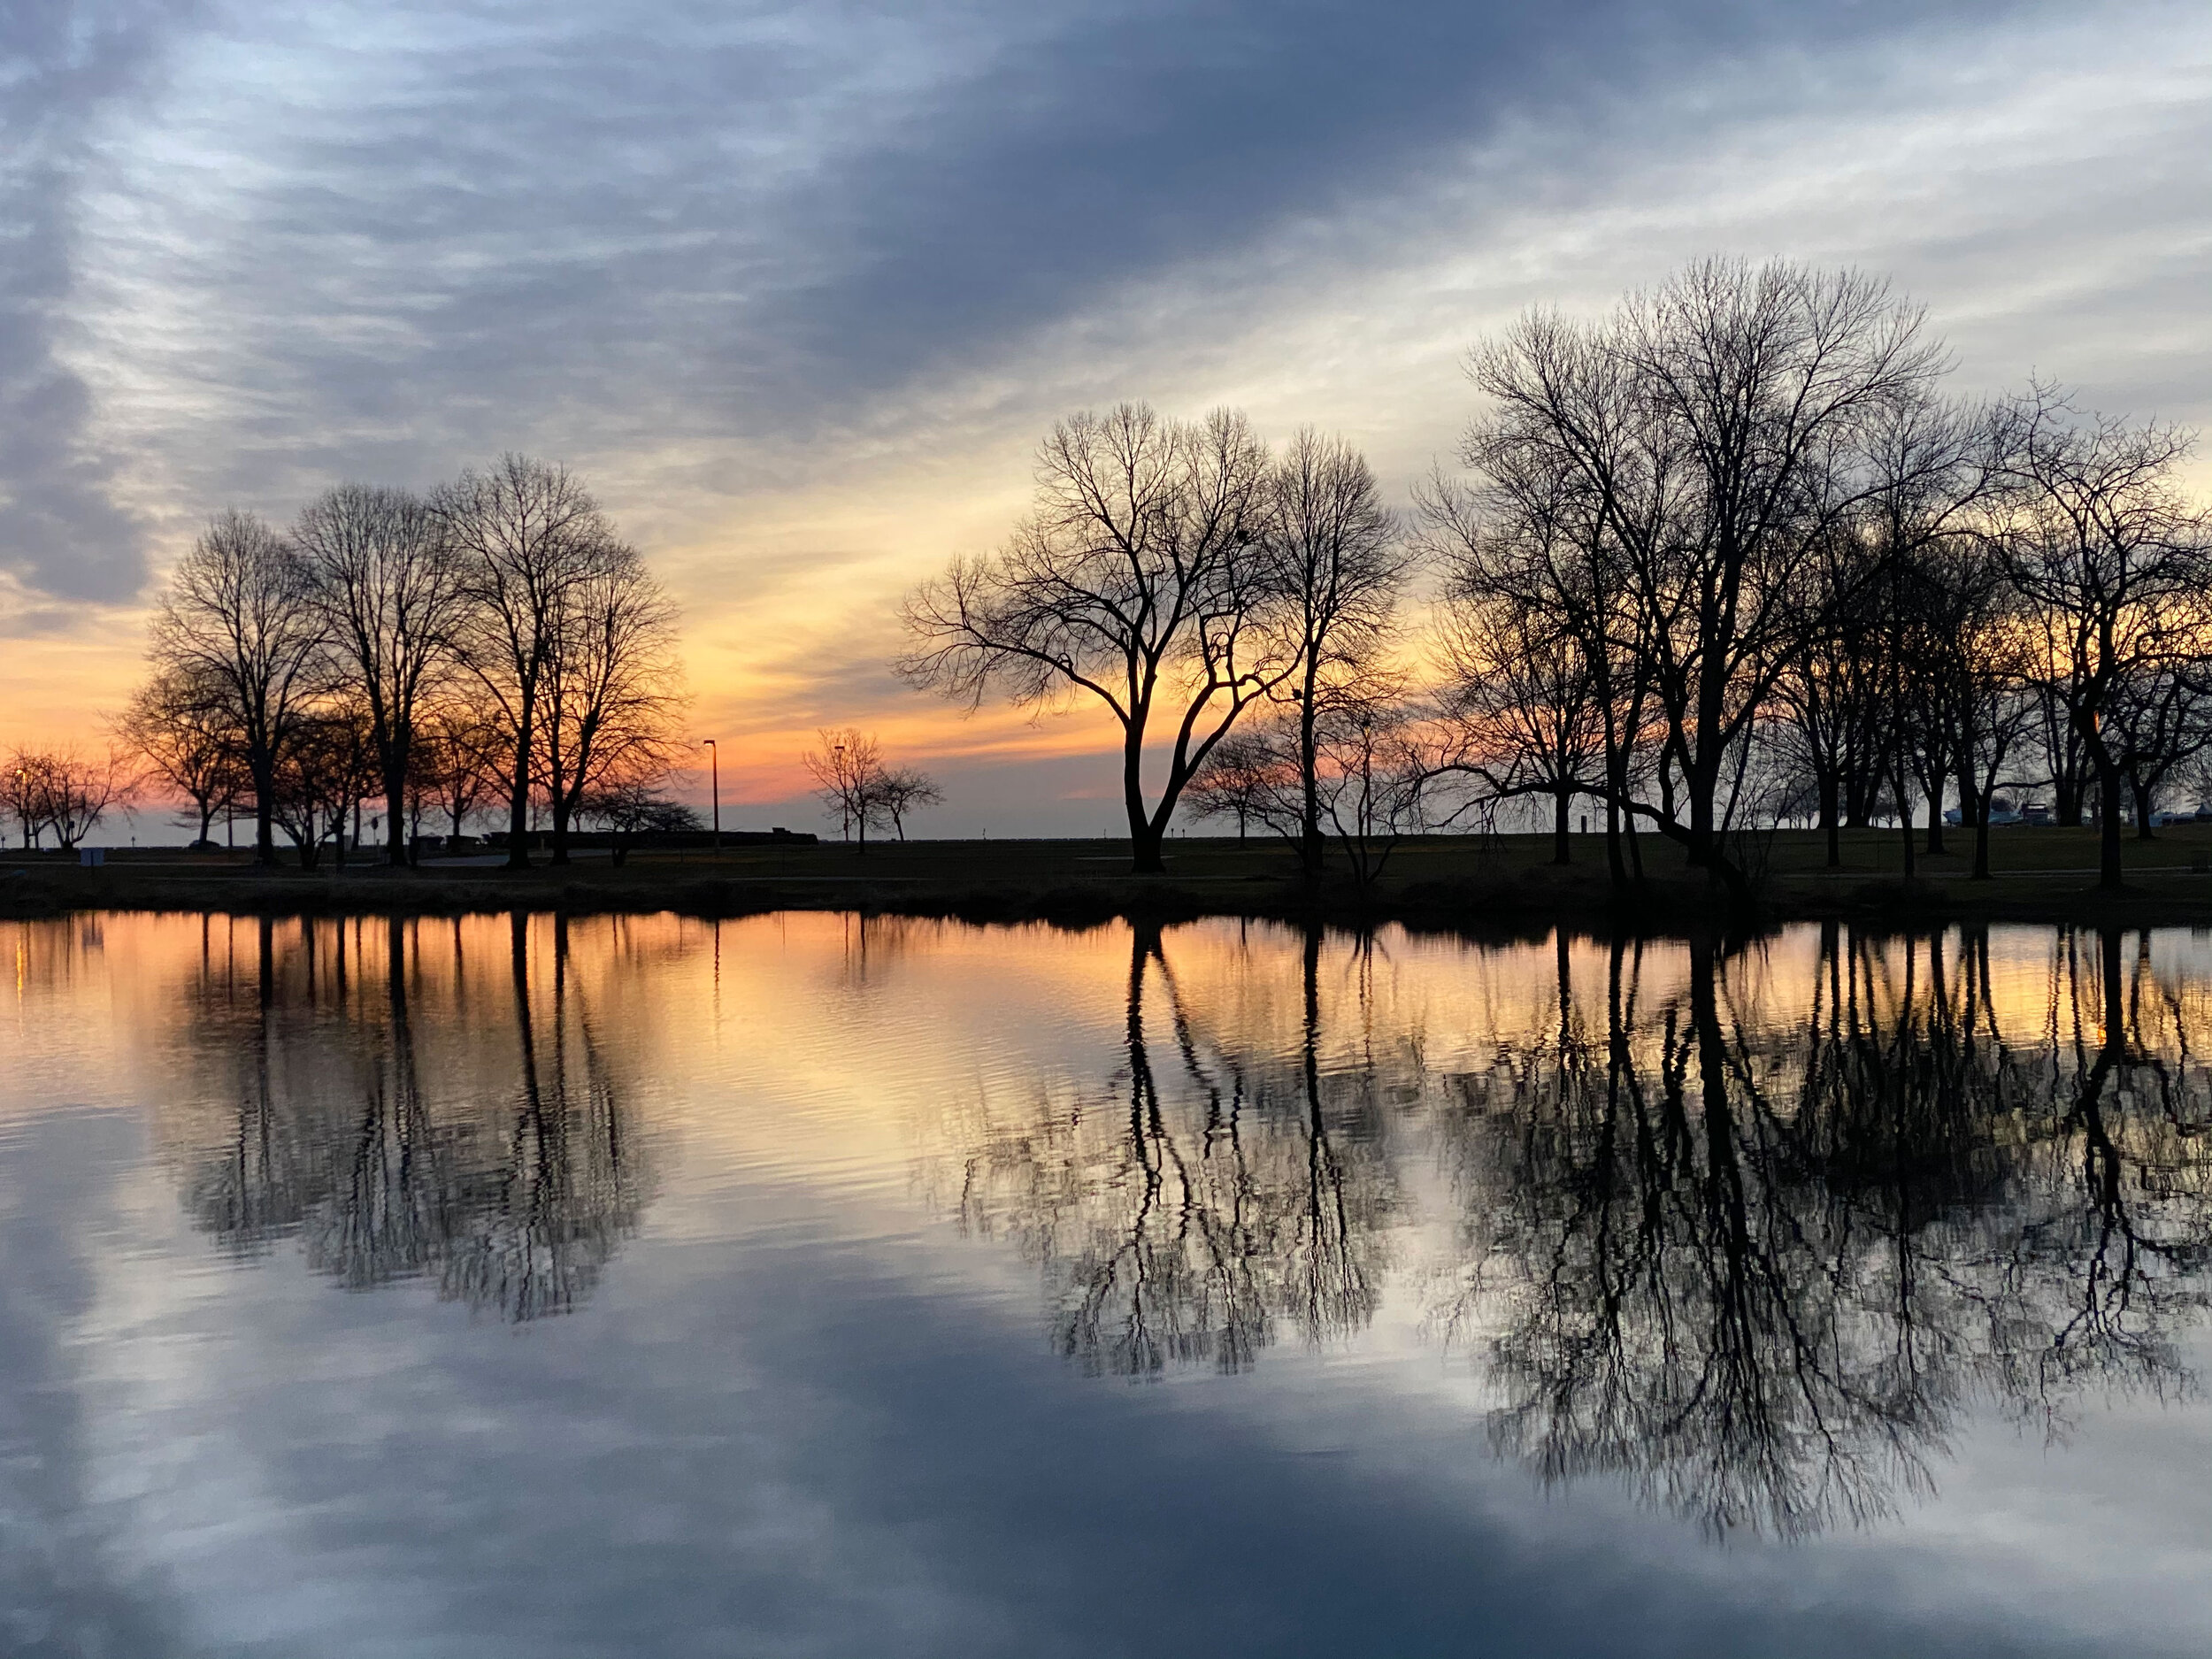 1st place - Early Morning Reflection - Kathy Smith